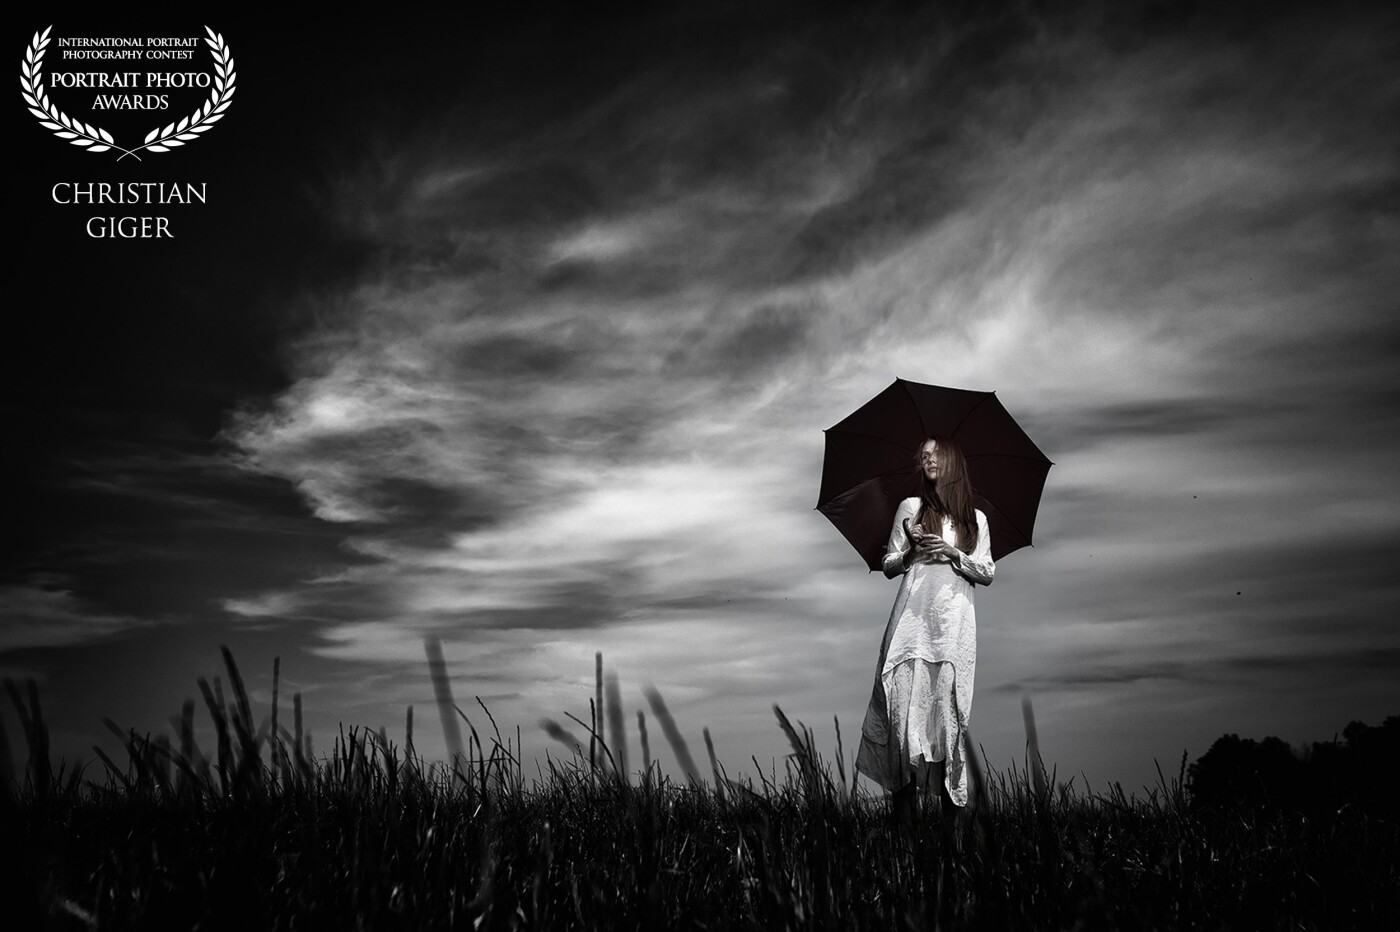 "Wandering under the sky". I used a portable flash system with an 18cm reflector with a grid to lighten the model's face as much as possible. The flash was being placed about 5m away from the model - just outside the picture.<br />
M: Lena